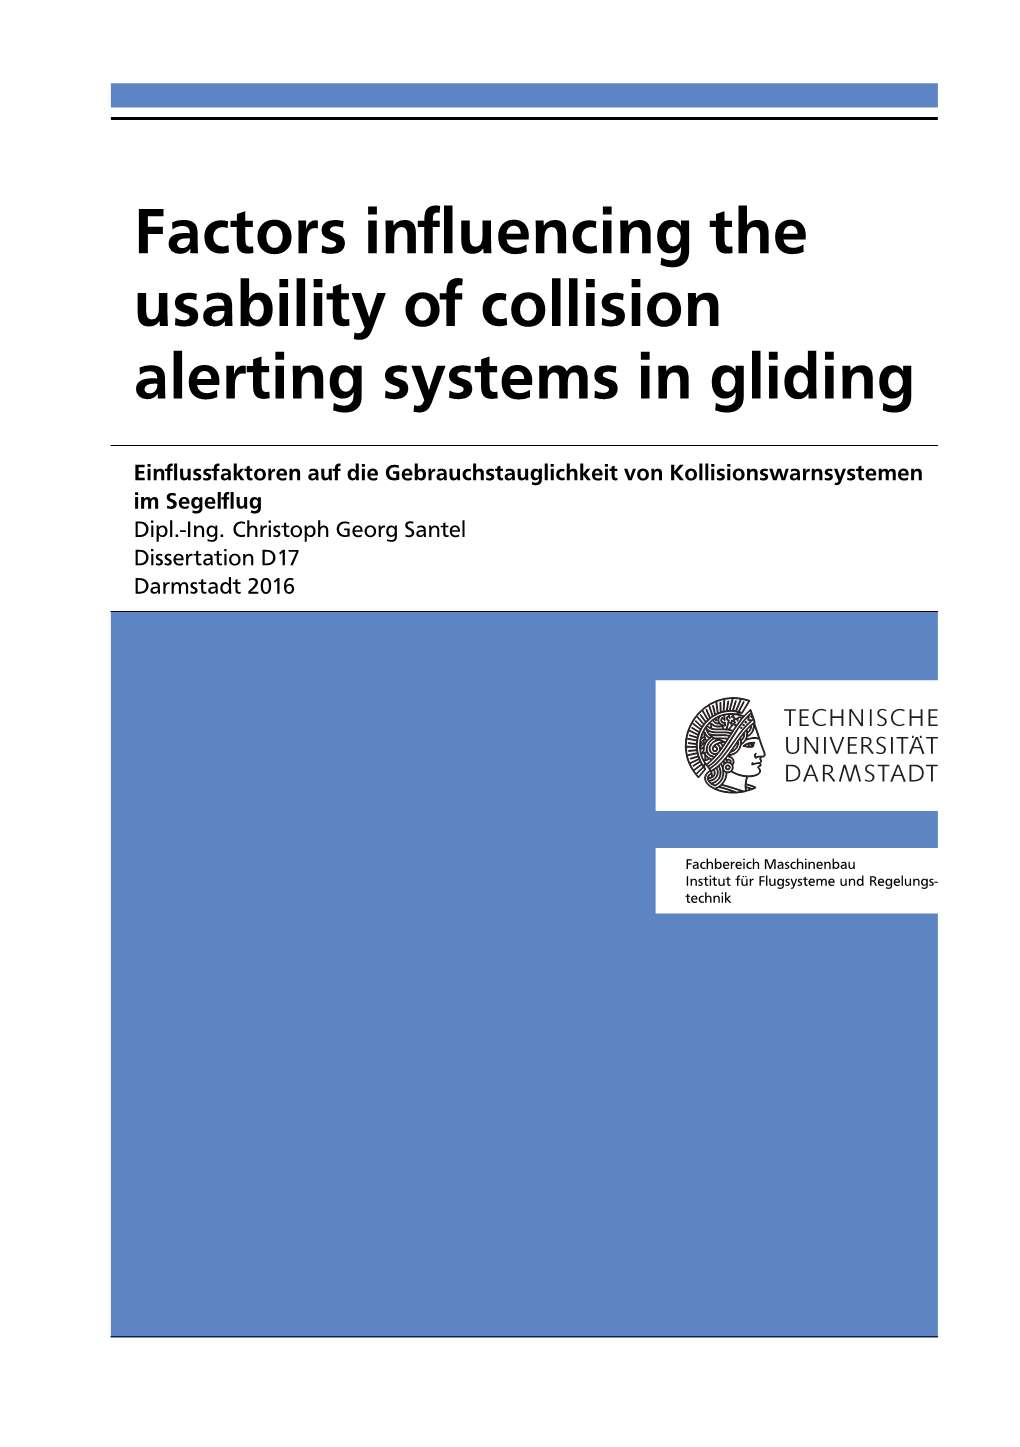 Factors Influencing the Usability of Collision Alerting Systems in Gliding